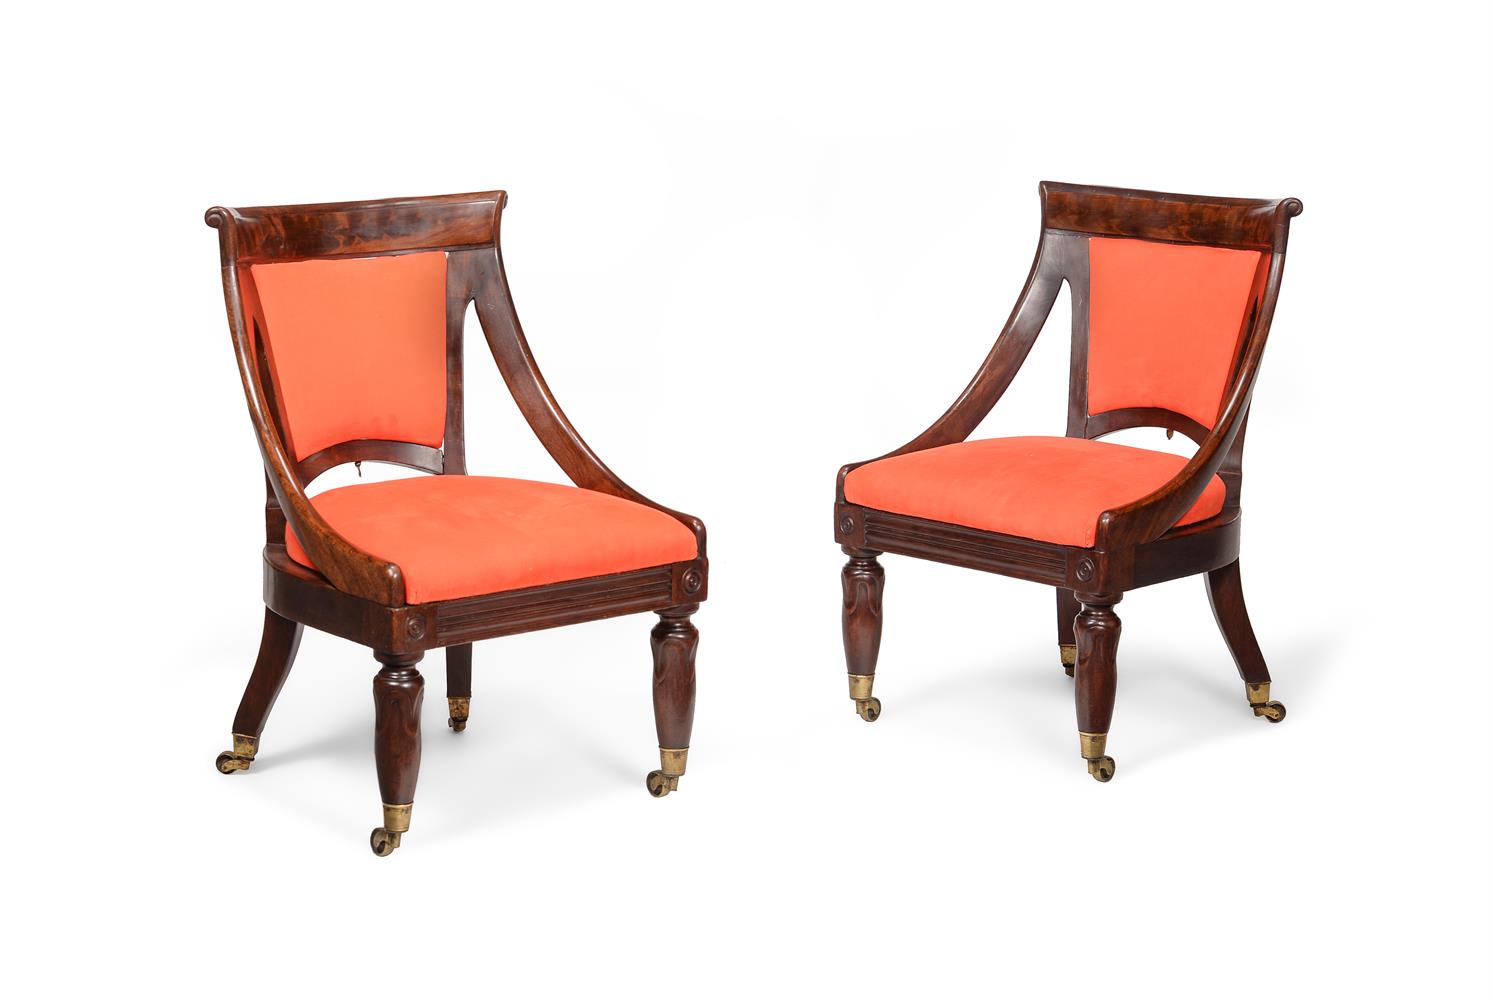 A PAIR OF MAHOGANY 'CURRICLE' CHAIRS, CIRCA 1820 AND LATER